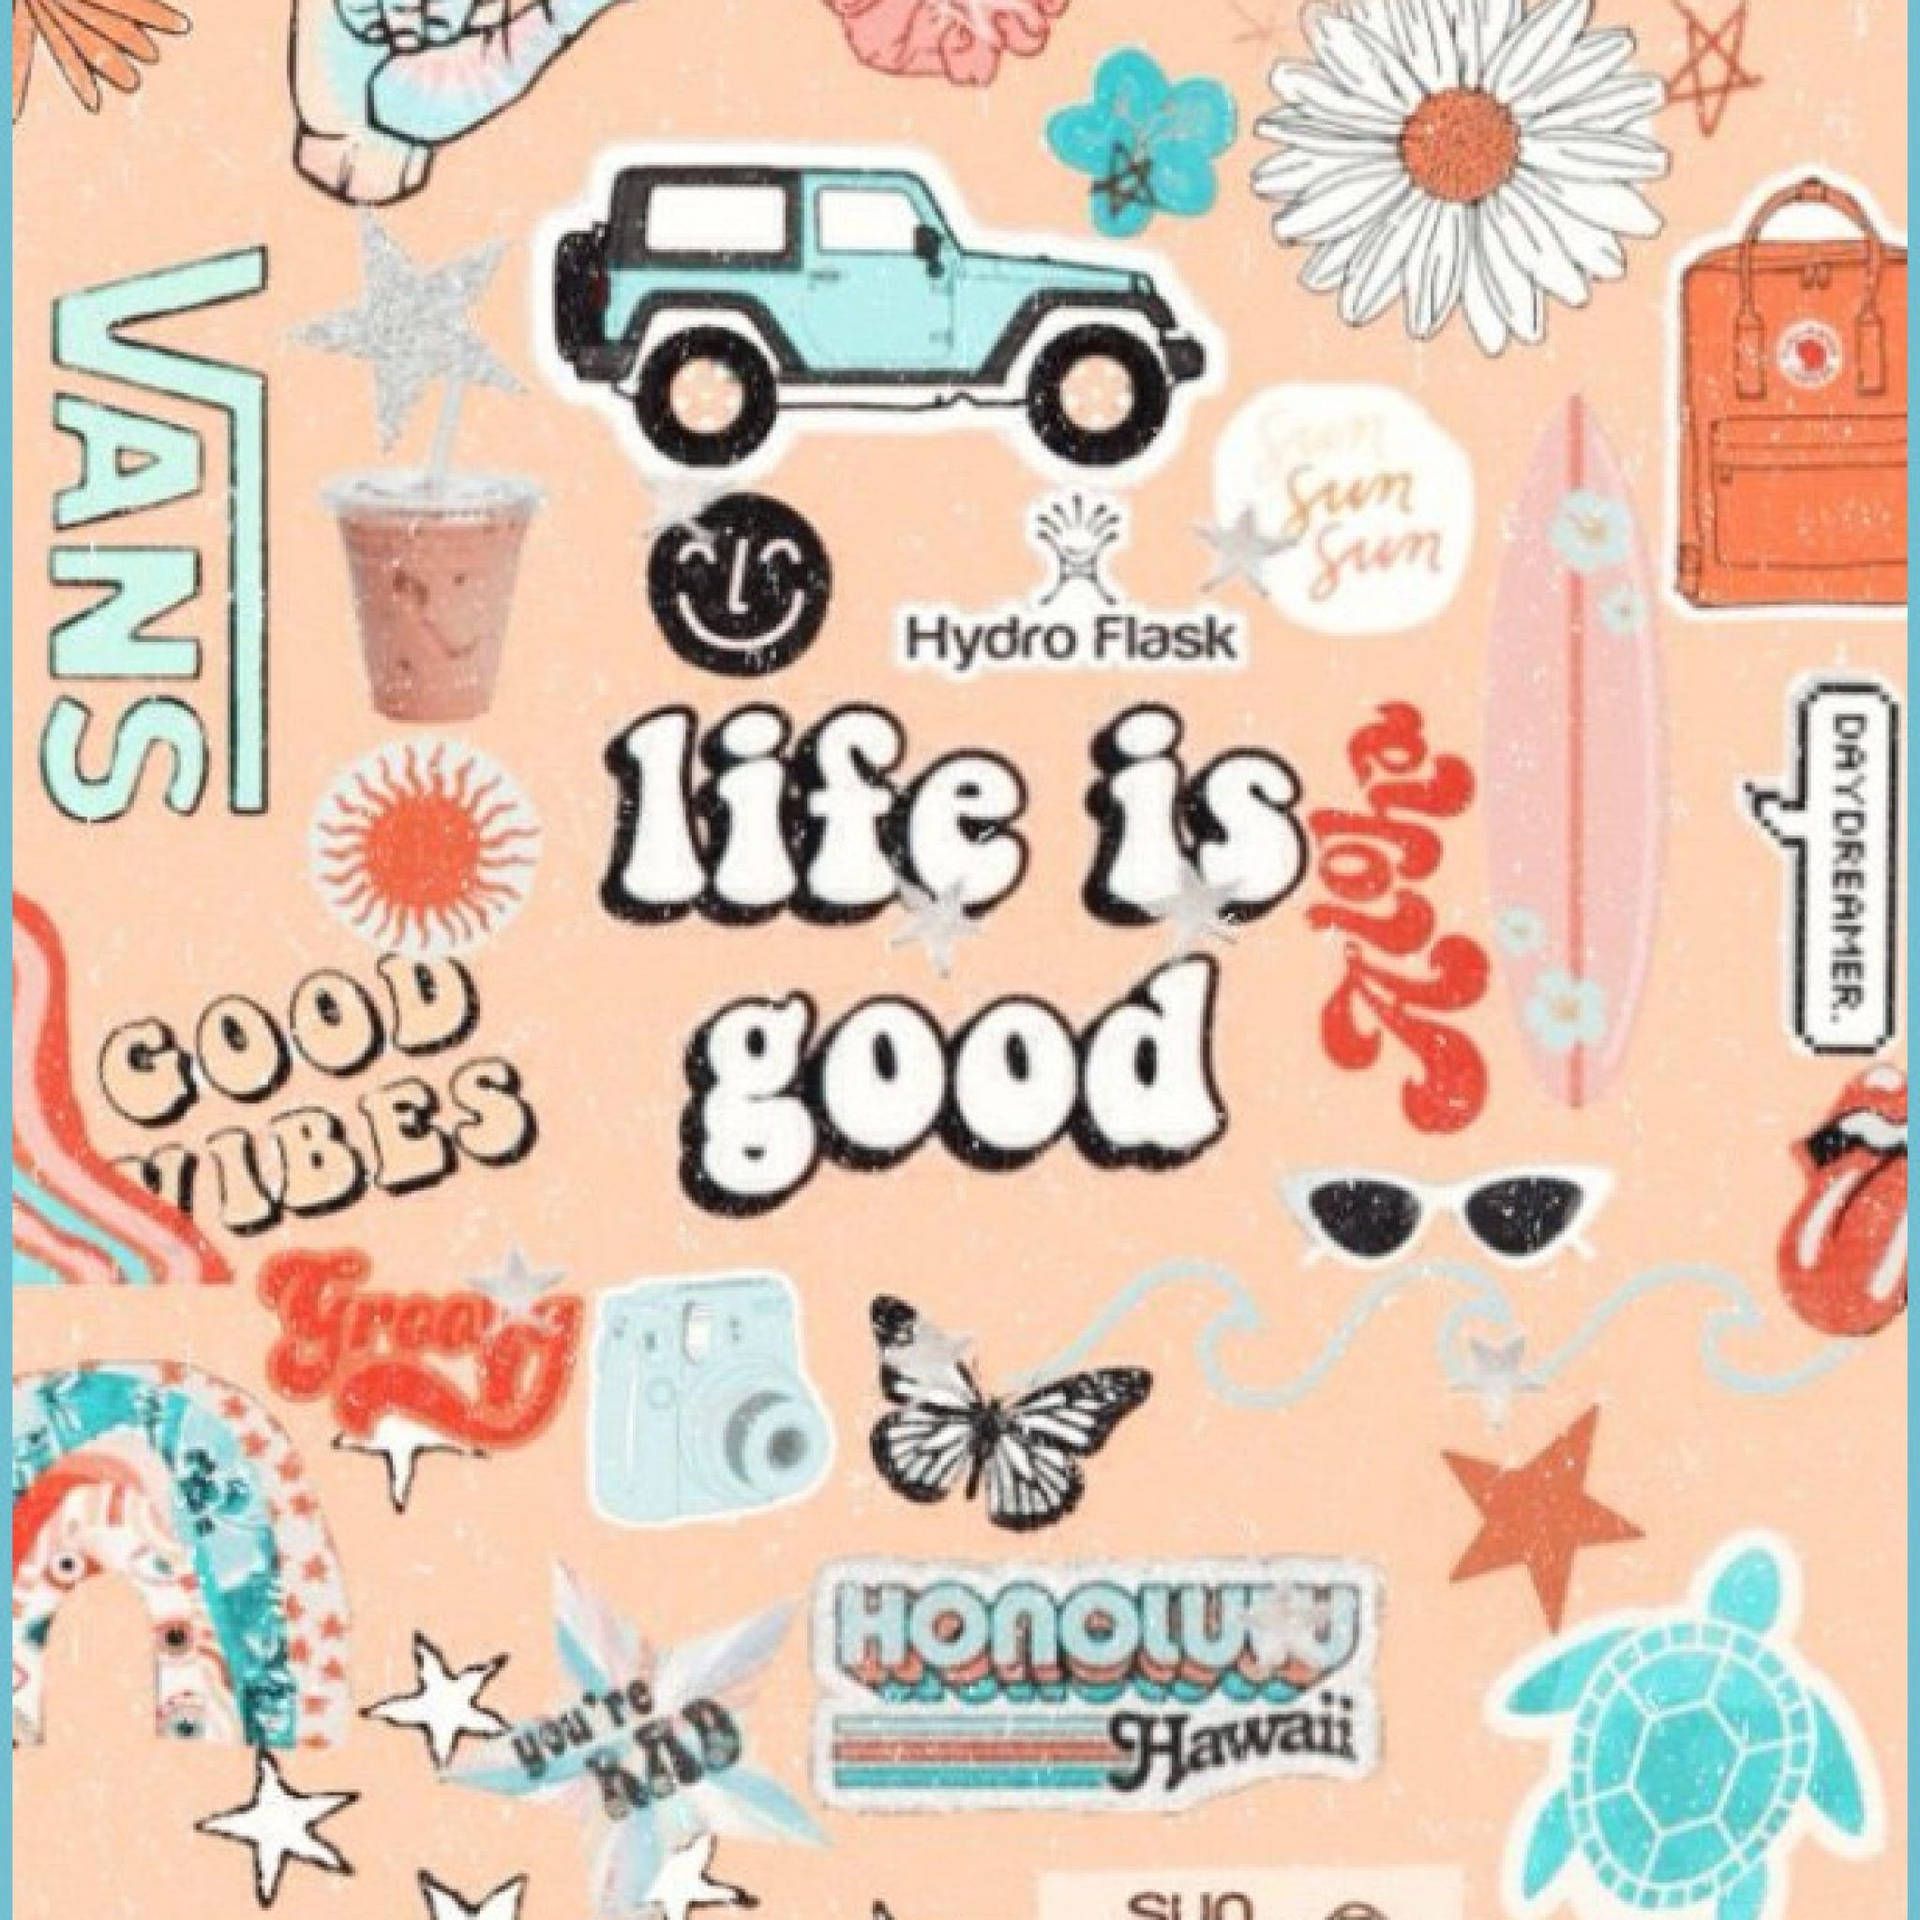 A collage of stickers including a car, a camera, a butterfly, a sun, a flower, a cup, a surfboard, a turtle, a camera, a van, a Hydro Flask, and the words 